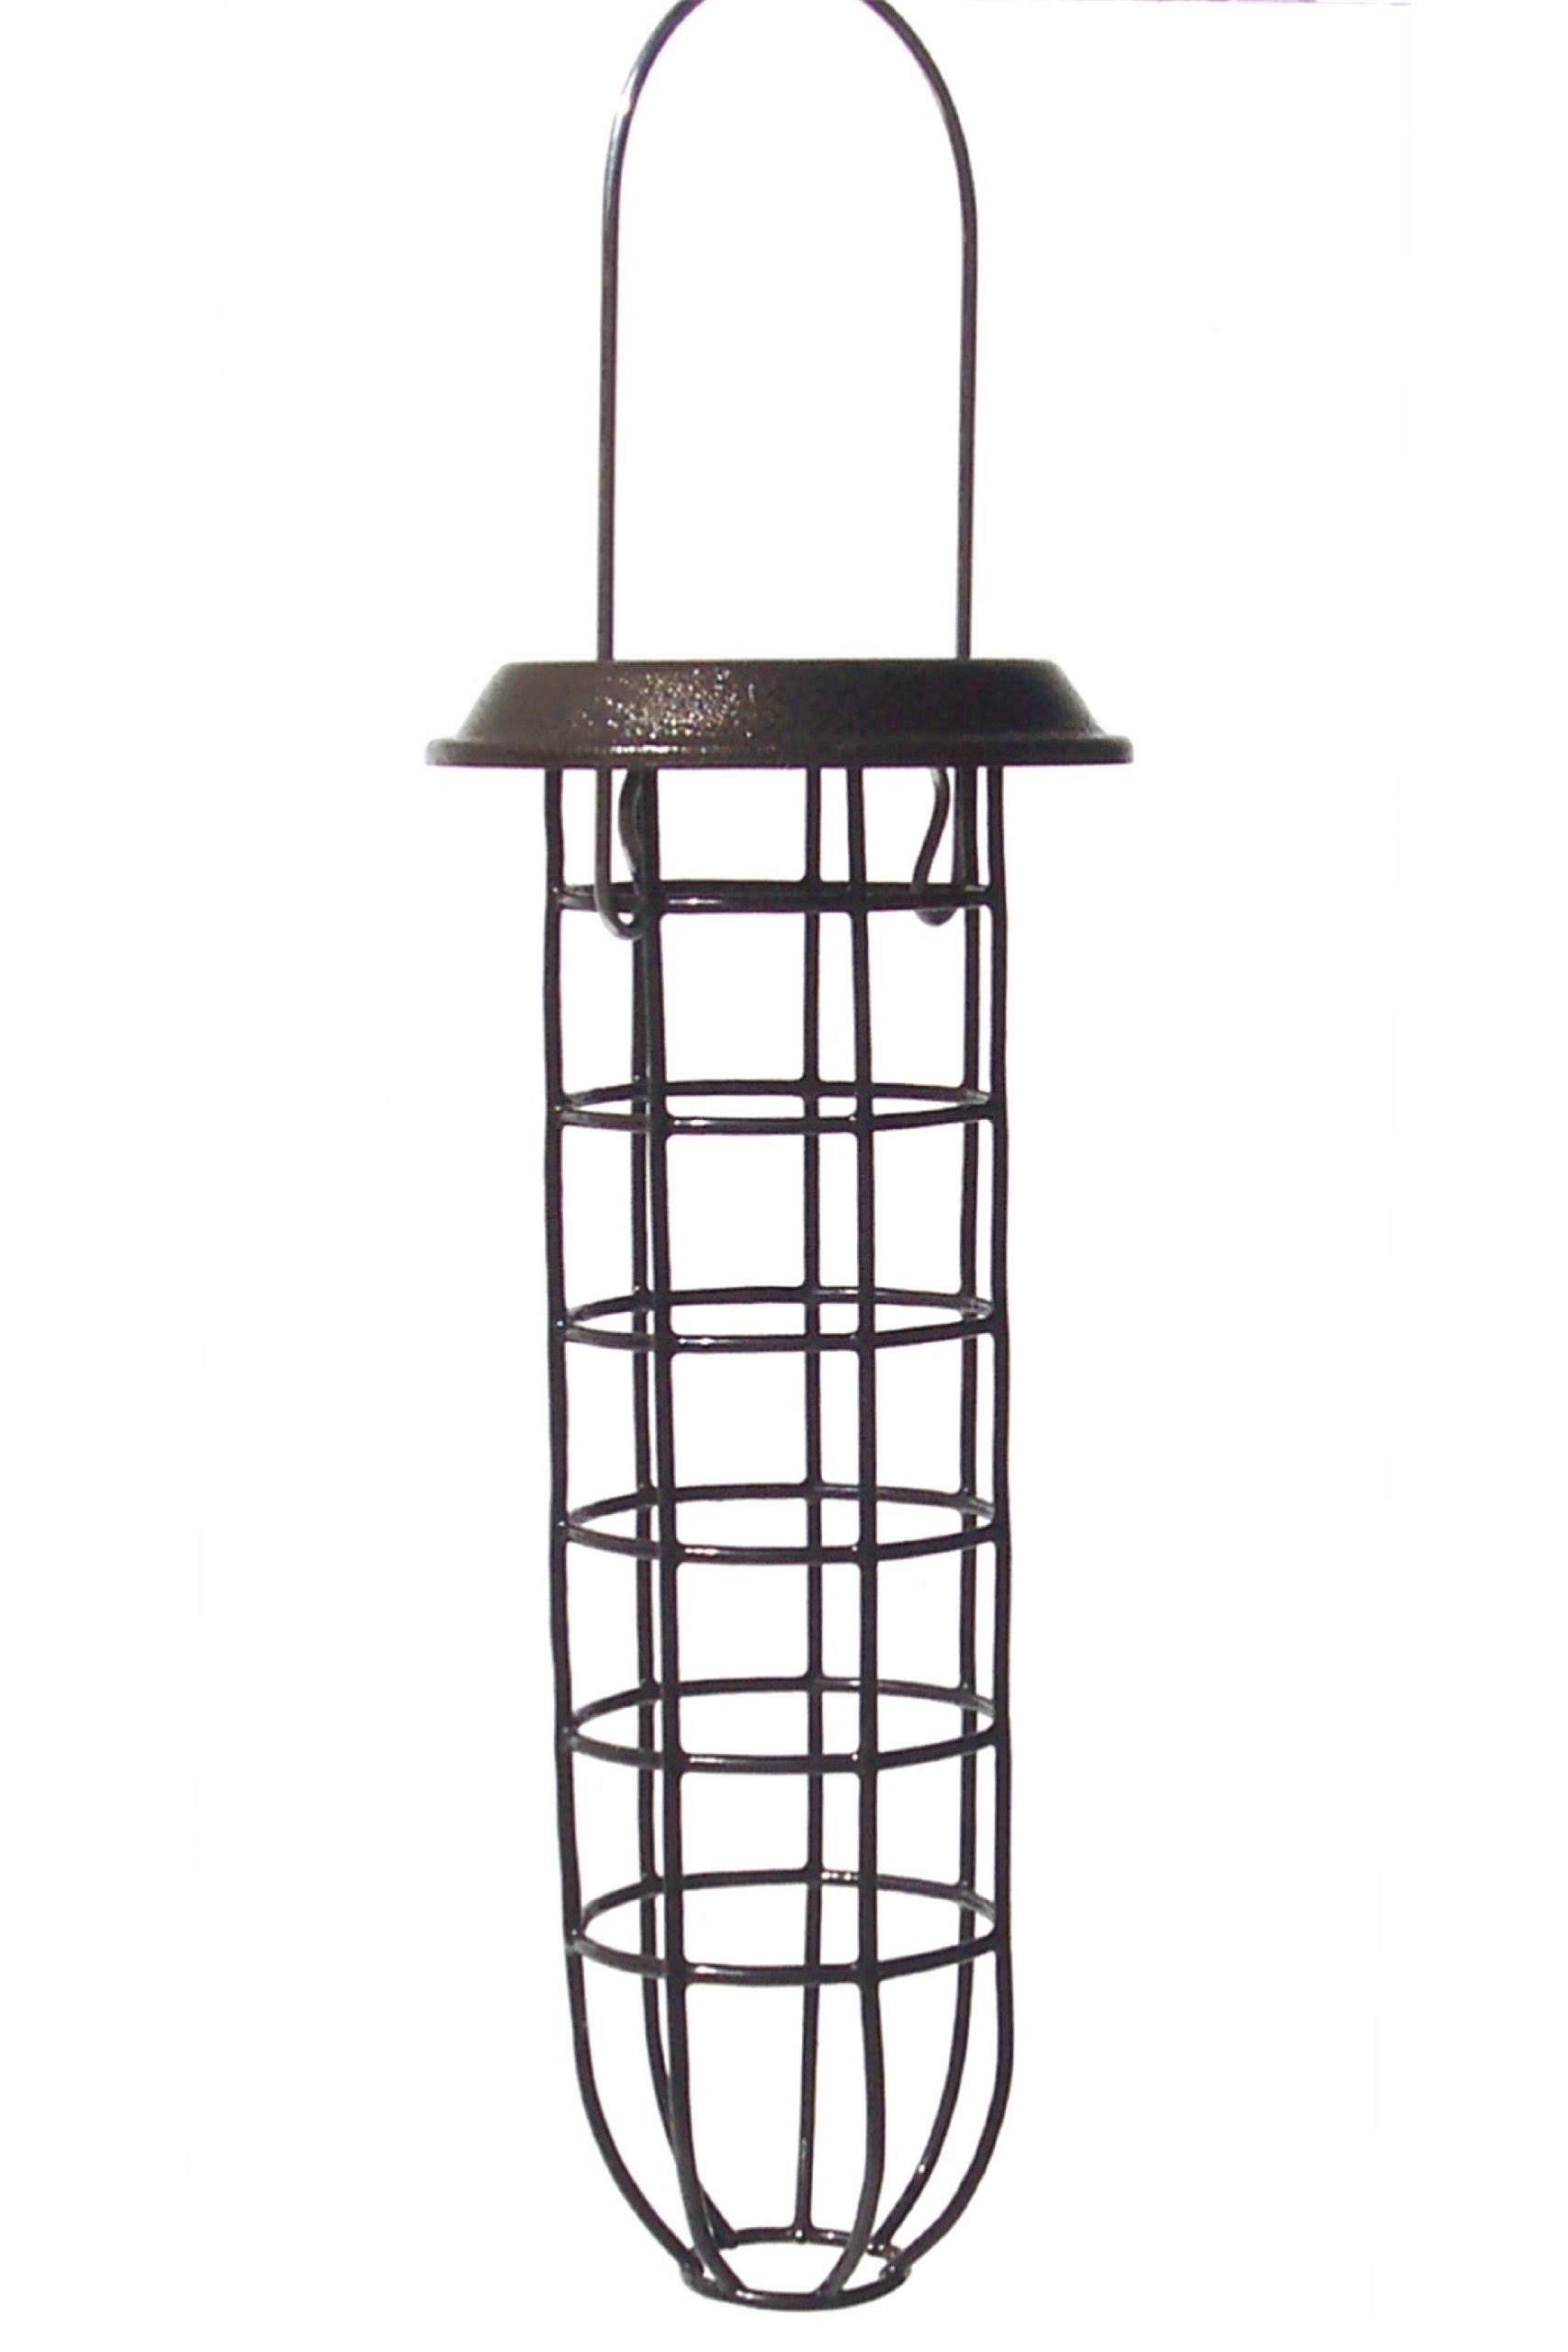 Wildlife Sciences Mesh Suet Ball Feeder - with Roof